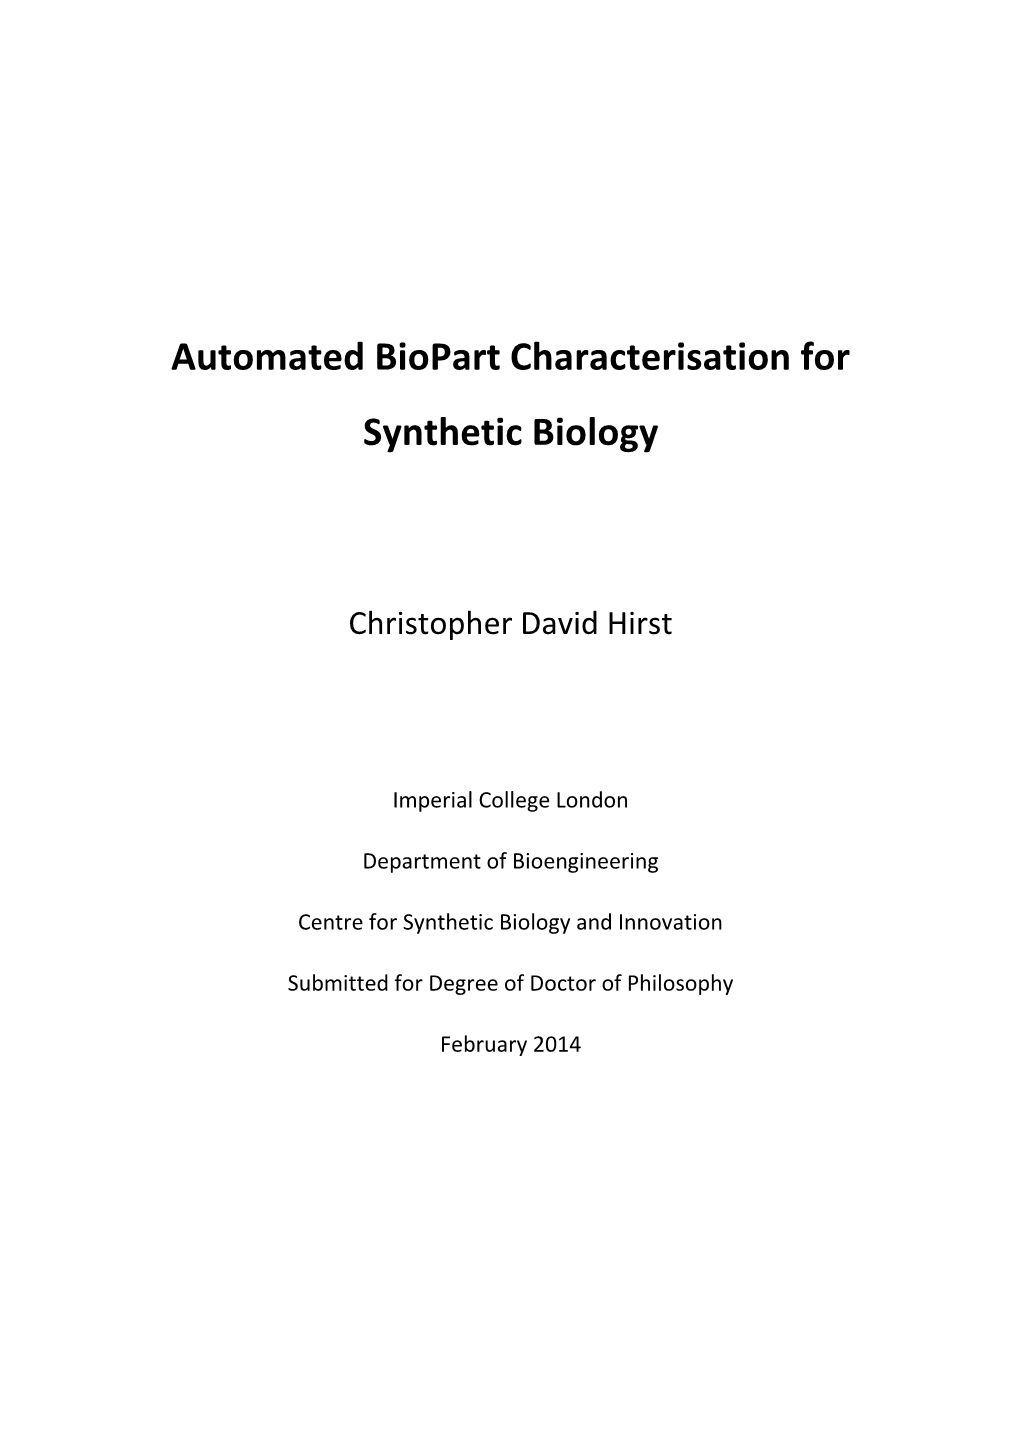 Automated Biopart Characterisation for Synthetic Biology